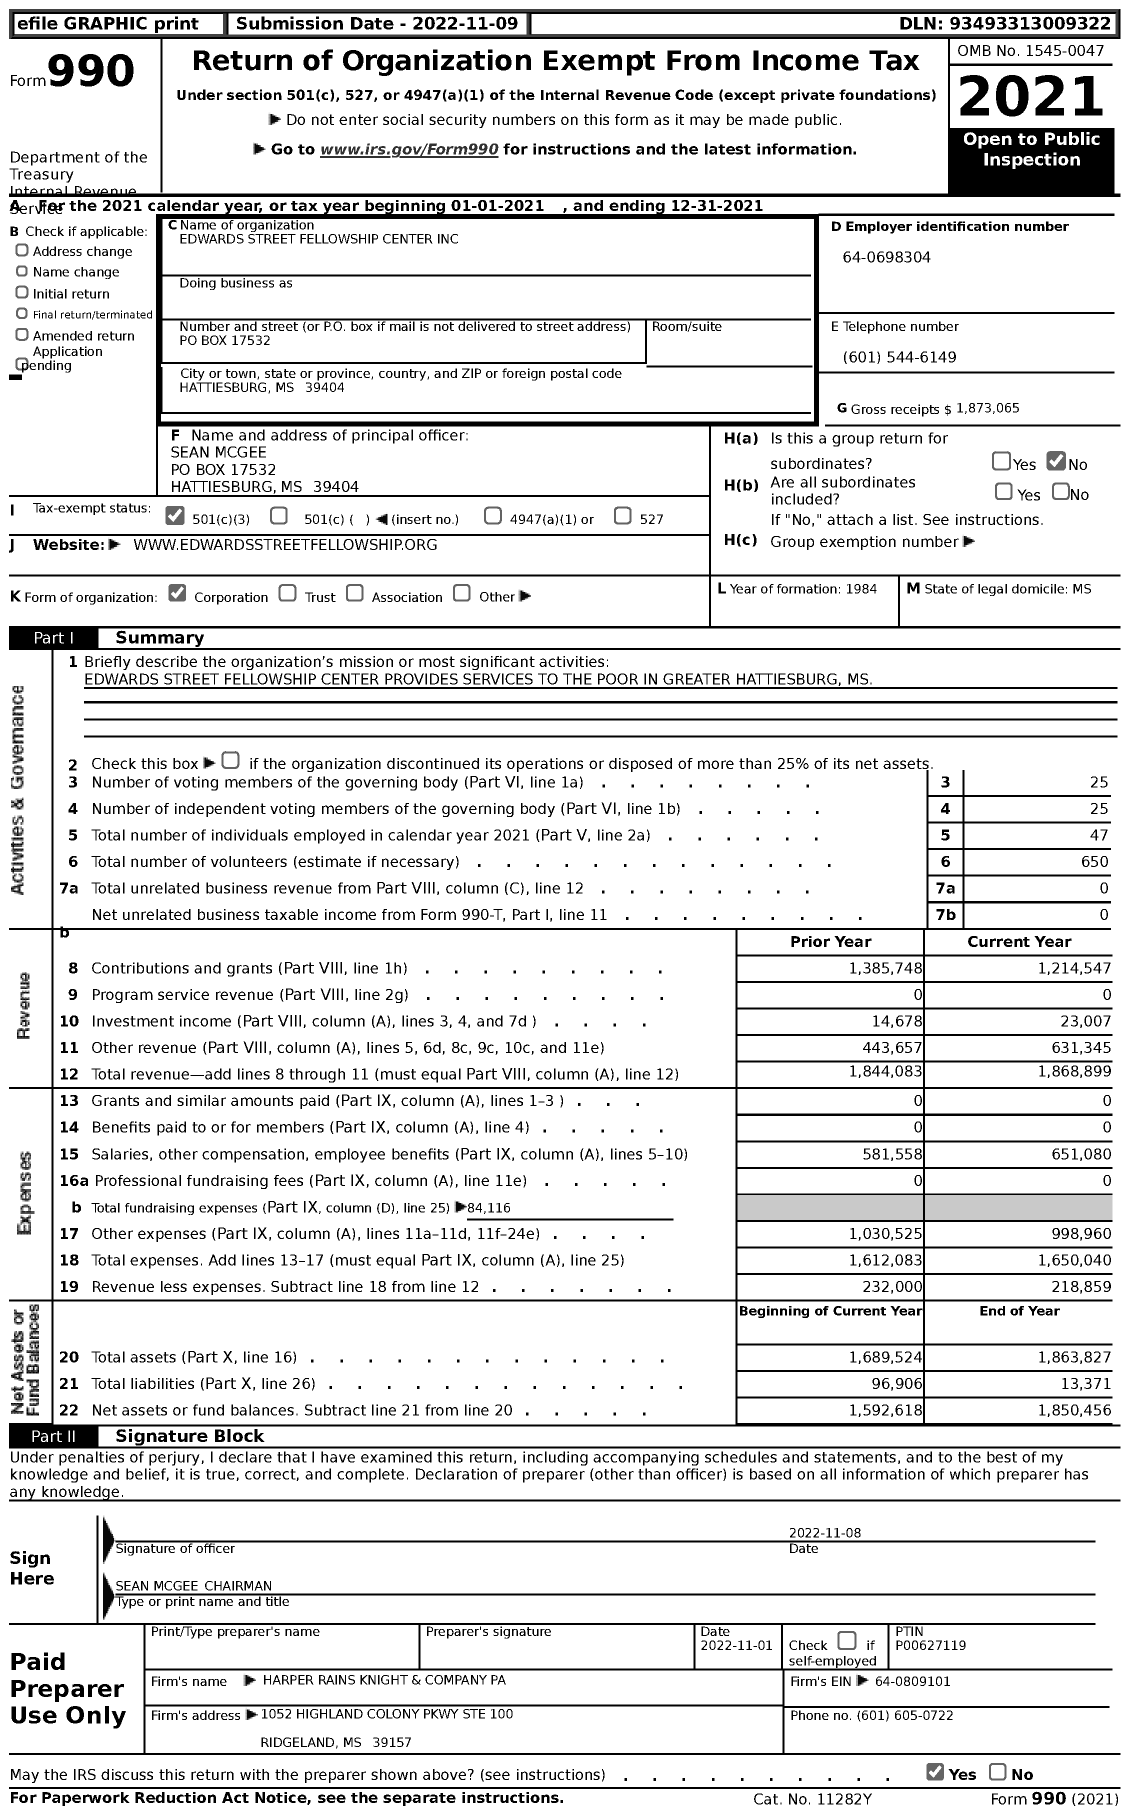 Image of first page of 2021 Form 990 for Edwards Street Fellowship Center